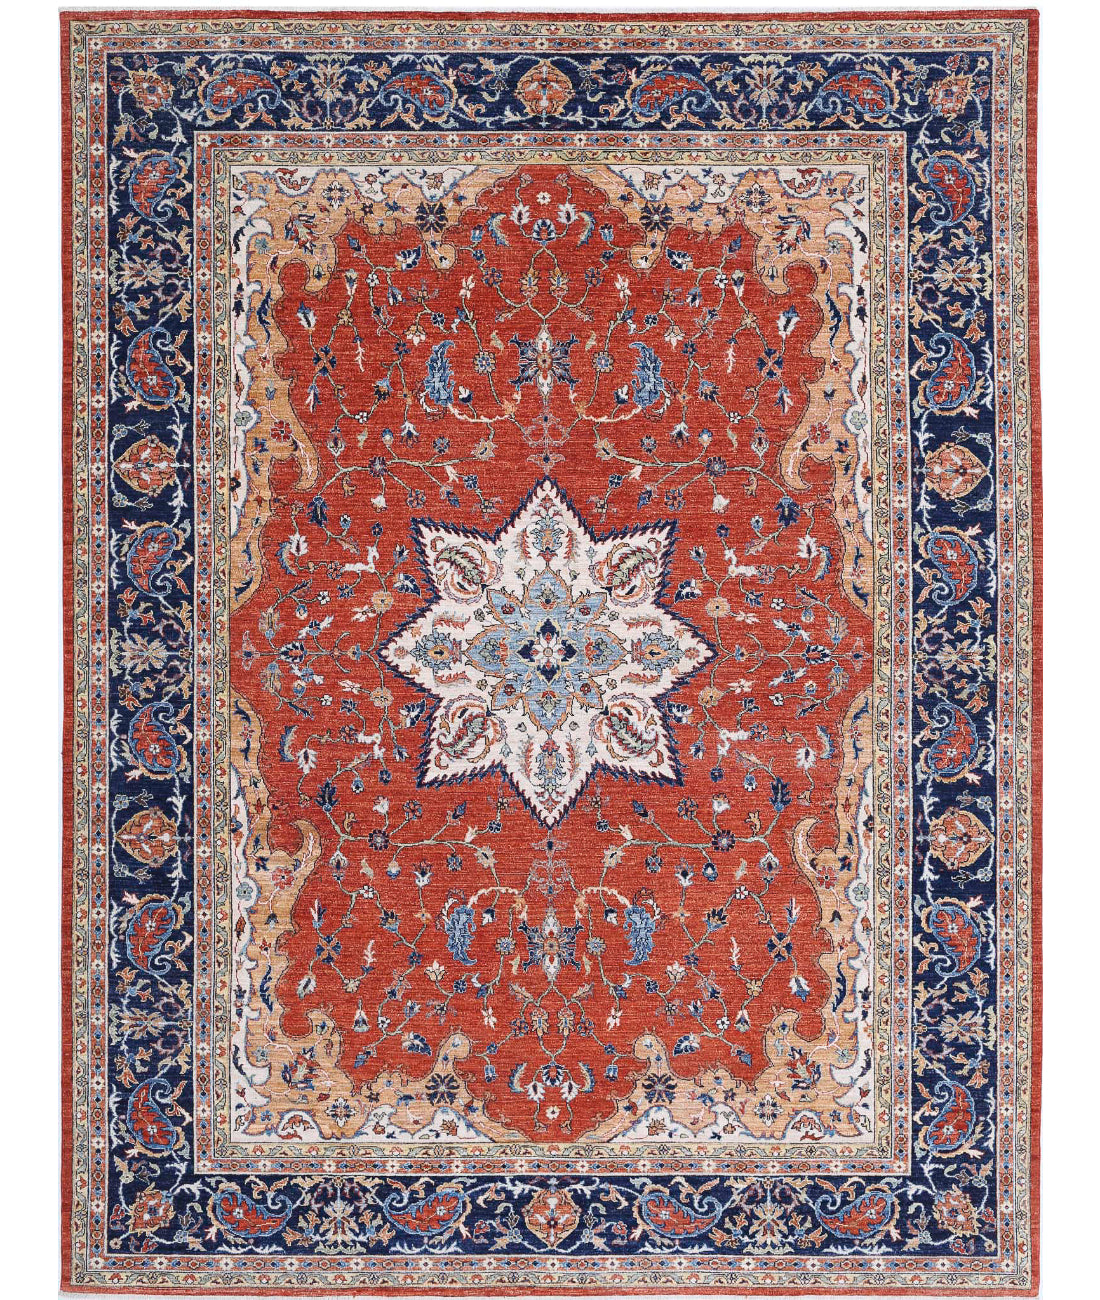 Hand Knotted Nomadic Caucasian Humna Wool Rug - 8'11'' x 11'8'' 8'11'' x 11'8'' (268 X 350) / Rust / Blue